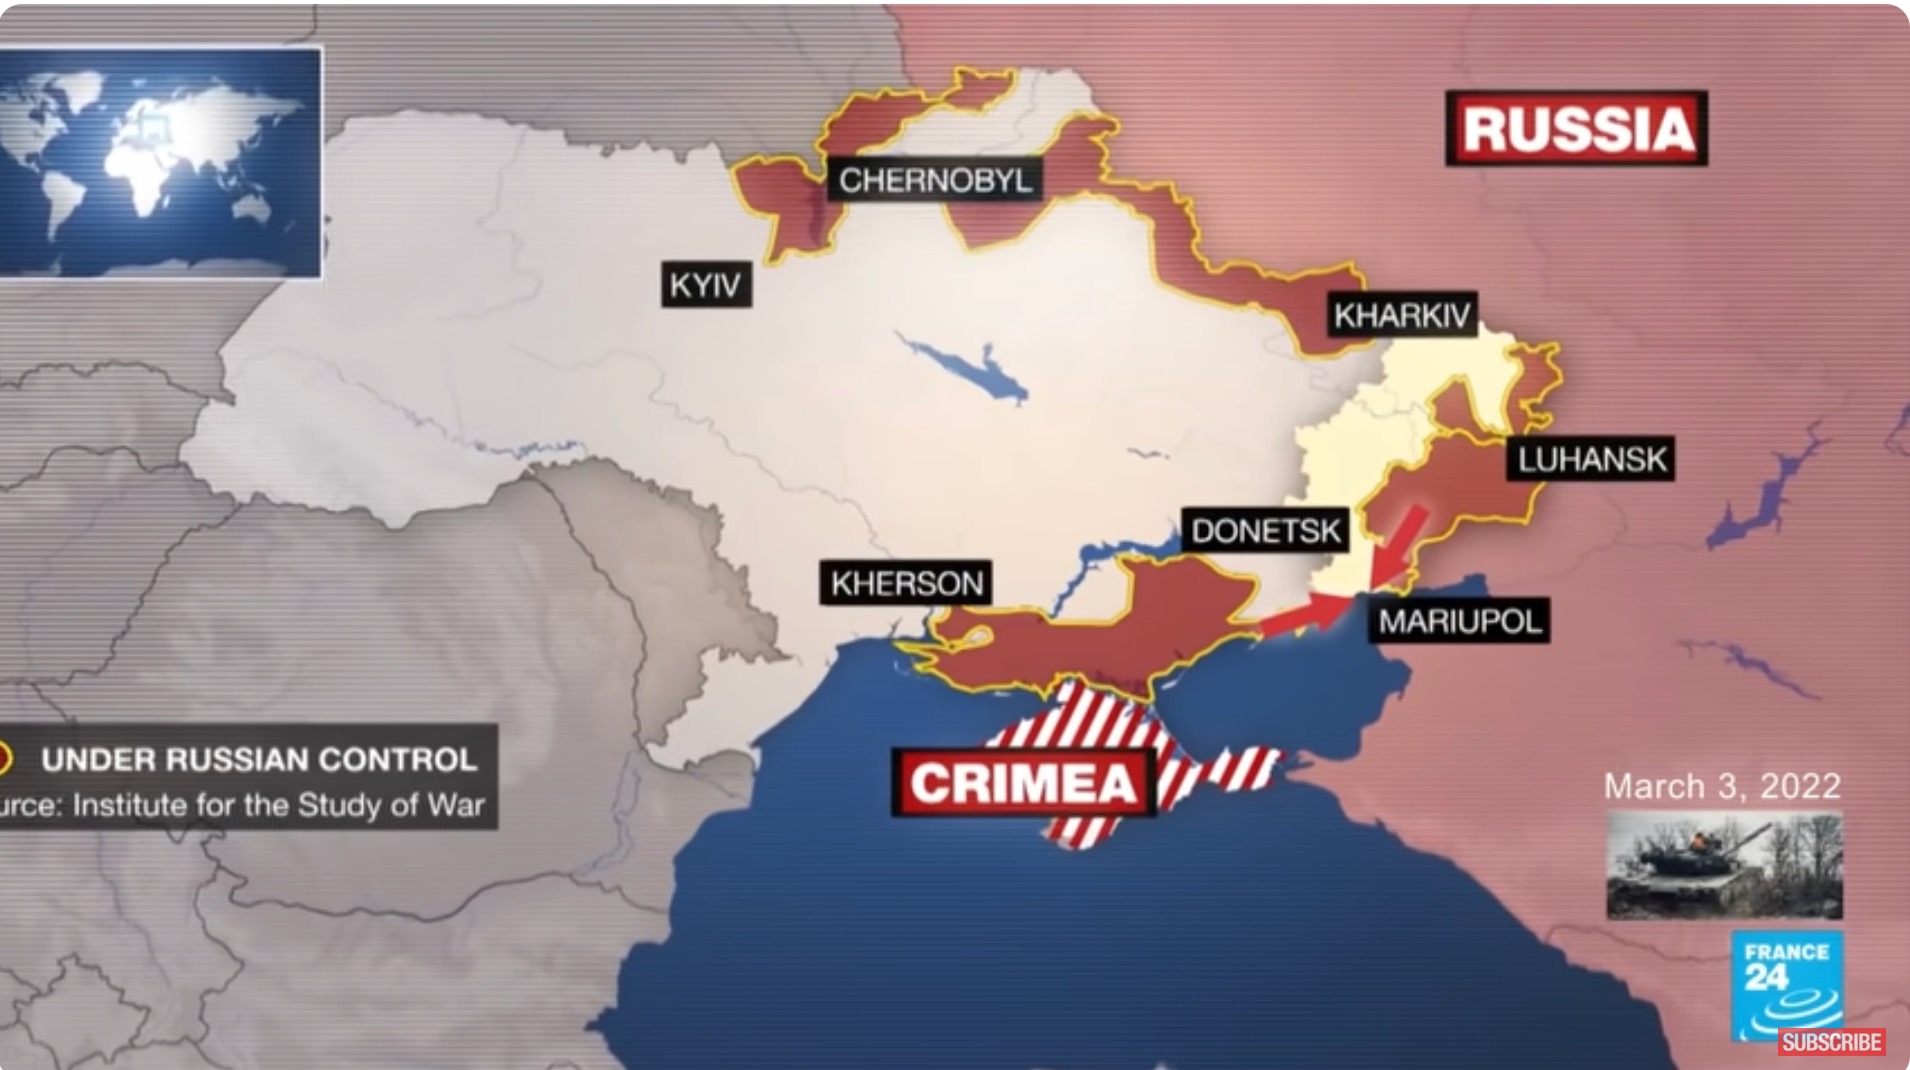 Image of a drawn map of Russia, Crimea, and Ukraine. Mariupol, a city in the Donestsk region, is highlighted with red arrows.